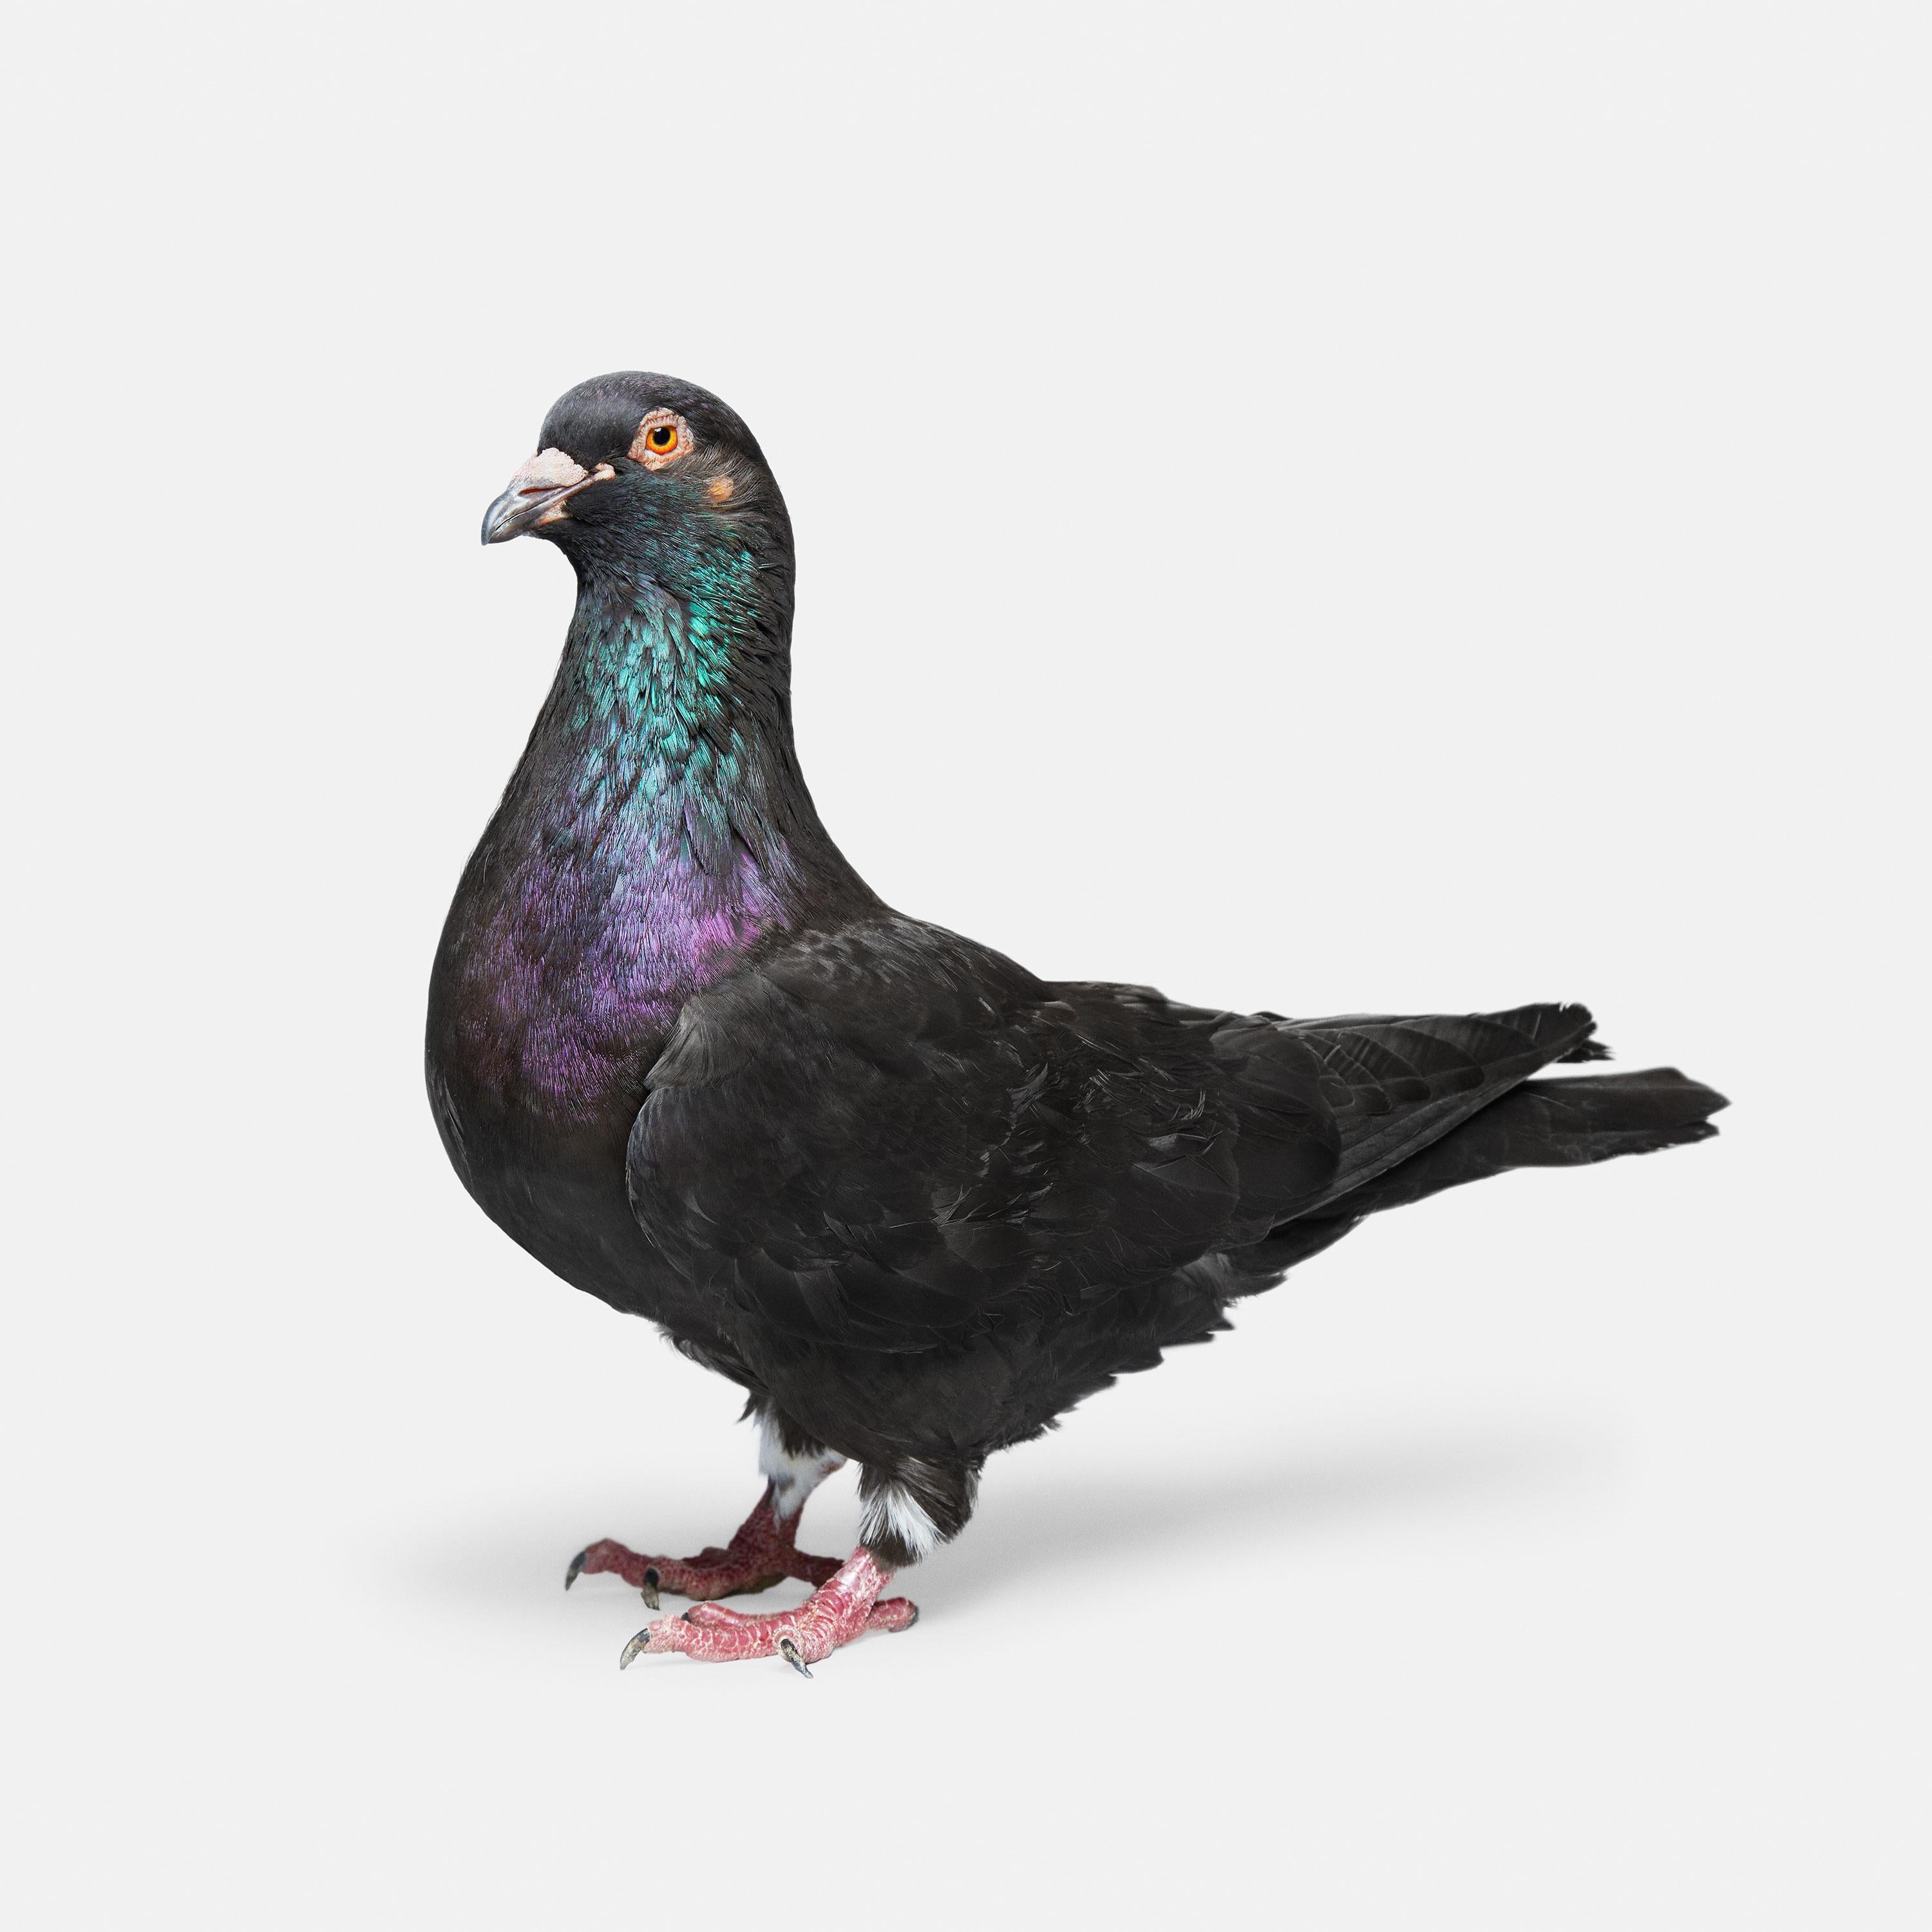 Randal Ford - Pigeon No. 3, Photography 2018